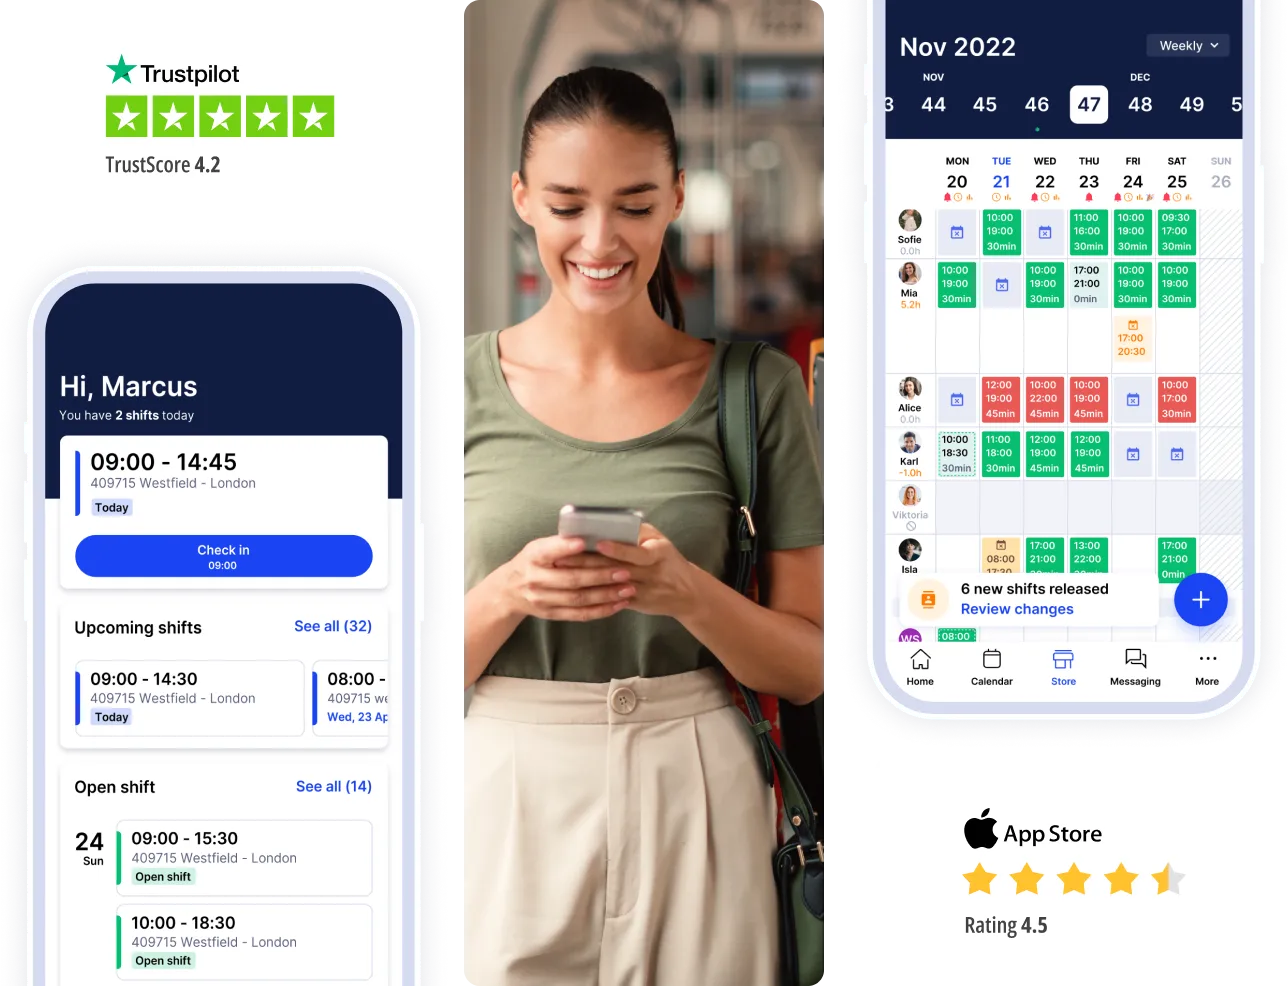 SameSystem mobile app examples with rating on Trustpilot 4.2 stars and on App Store 4.5 stars